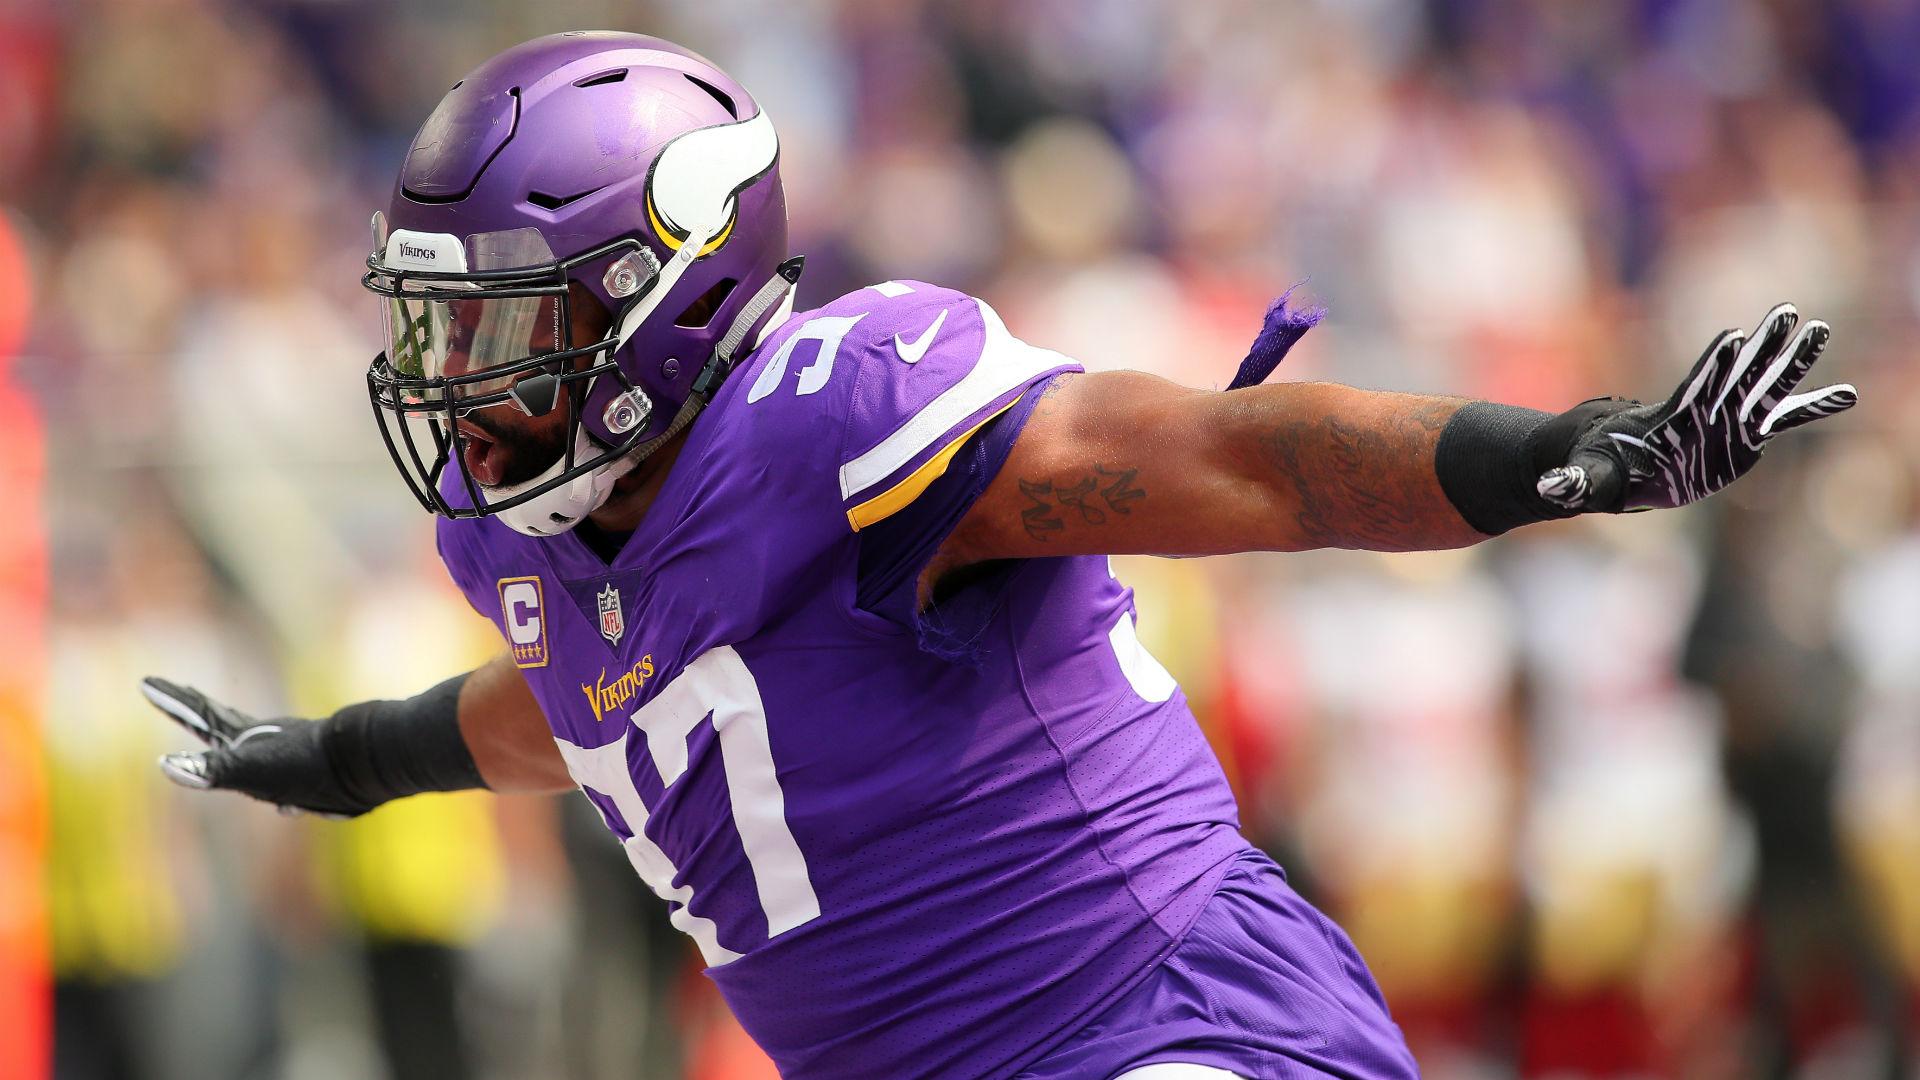 Vikings' Everson Griffen expected to play vs. Saints after missing 5